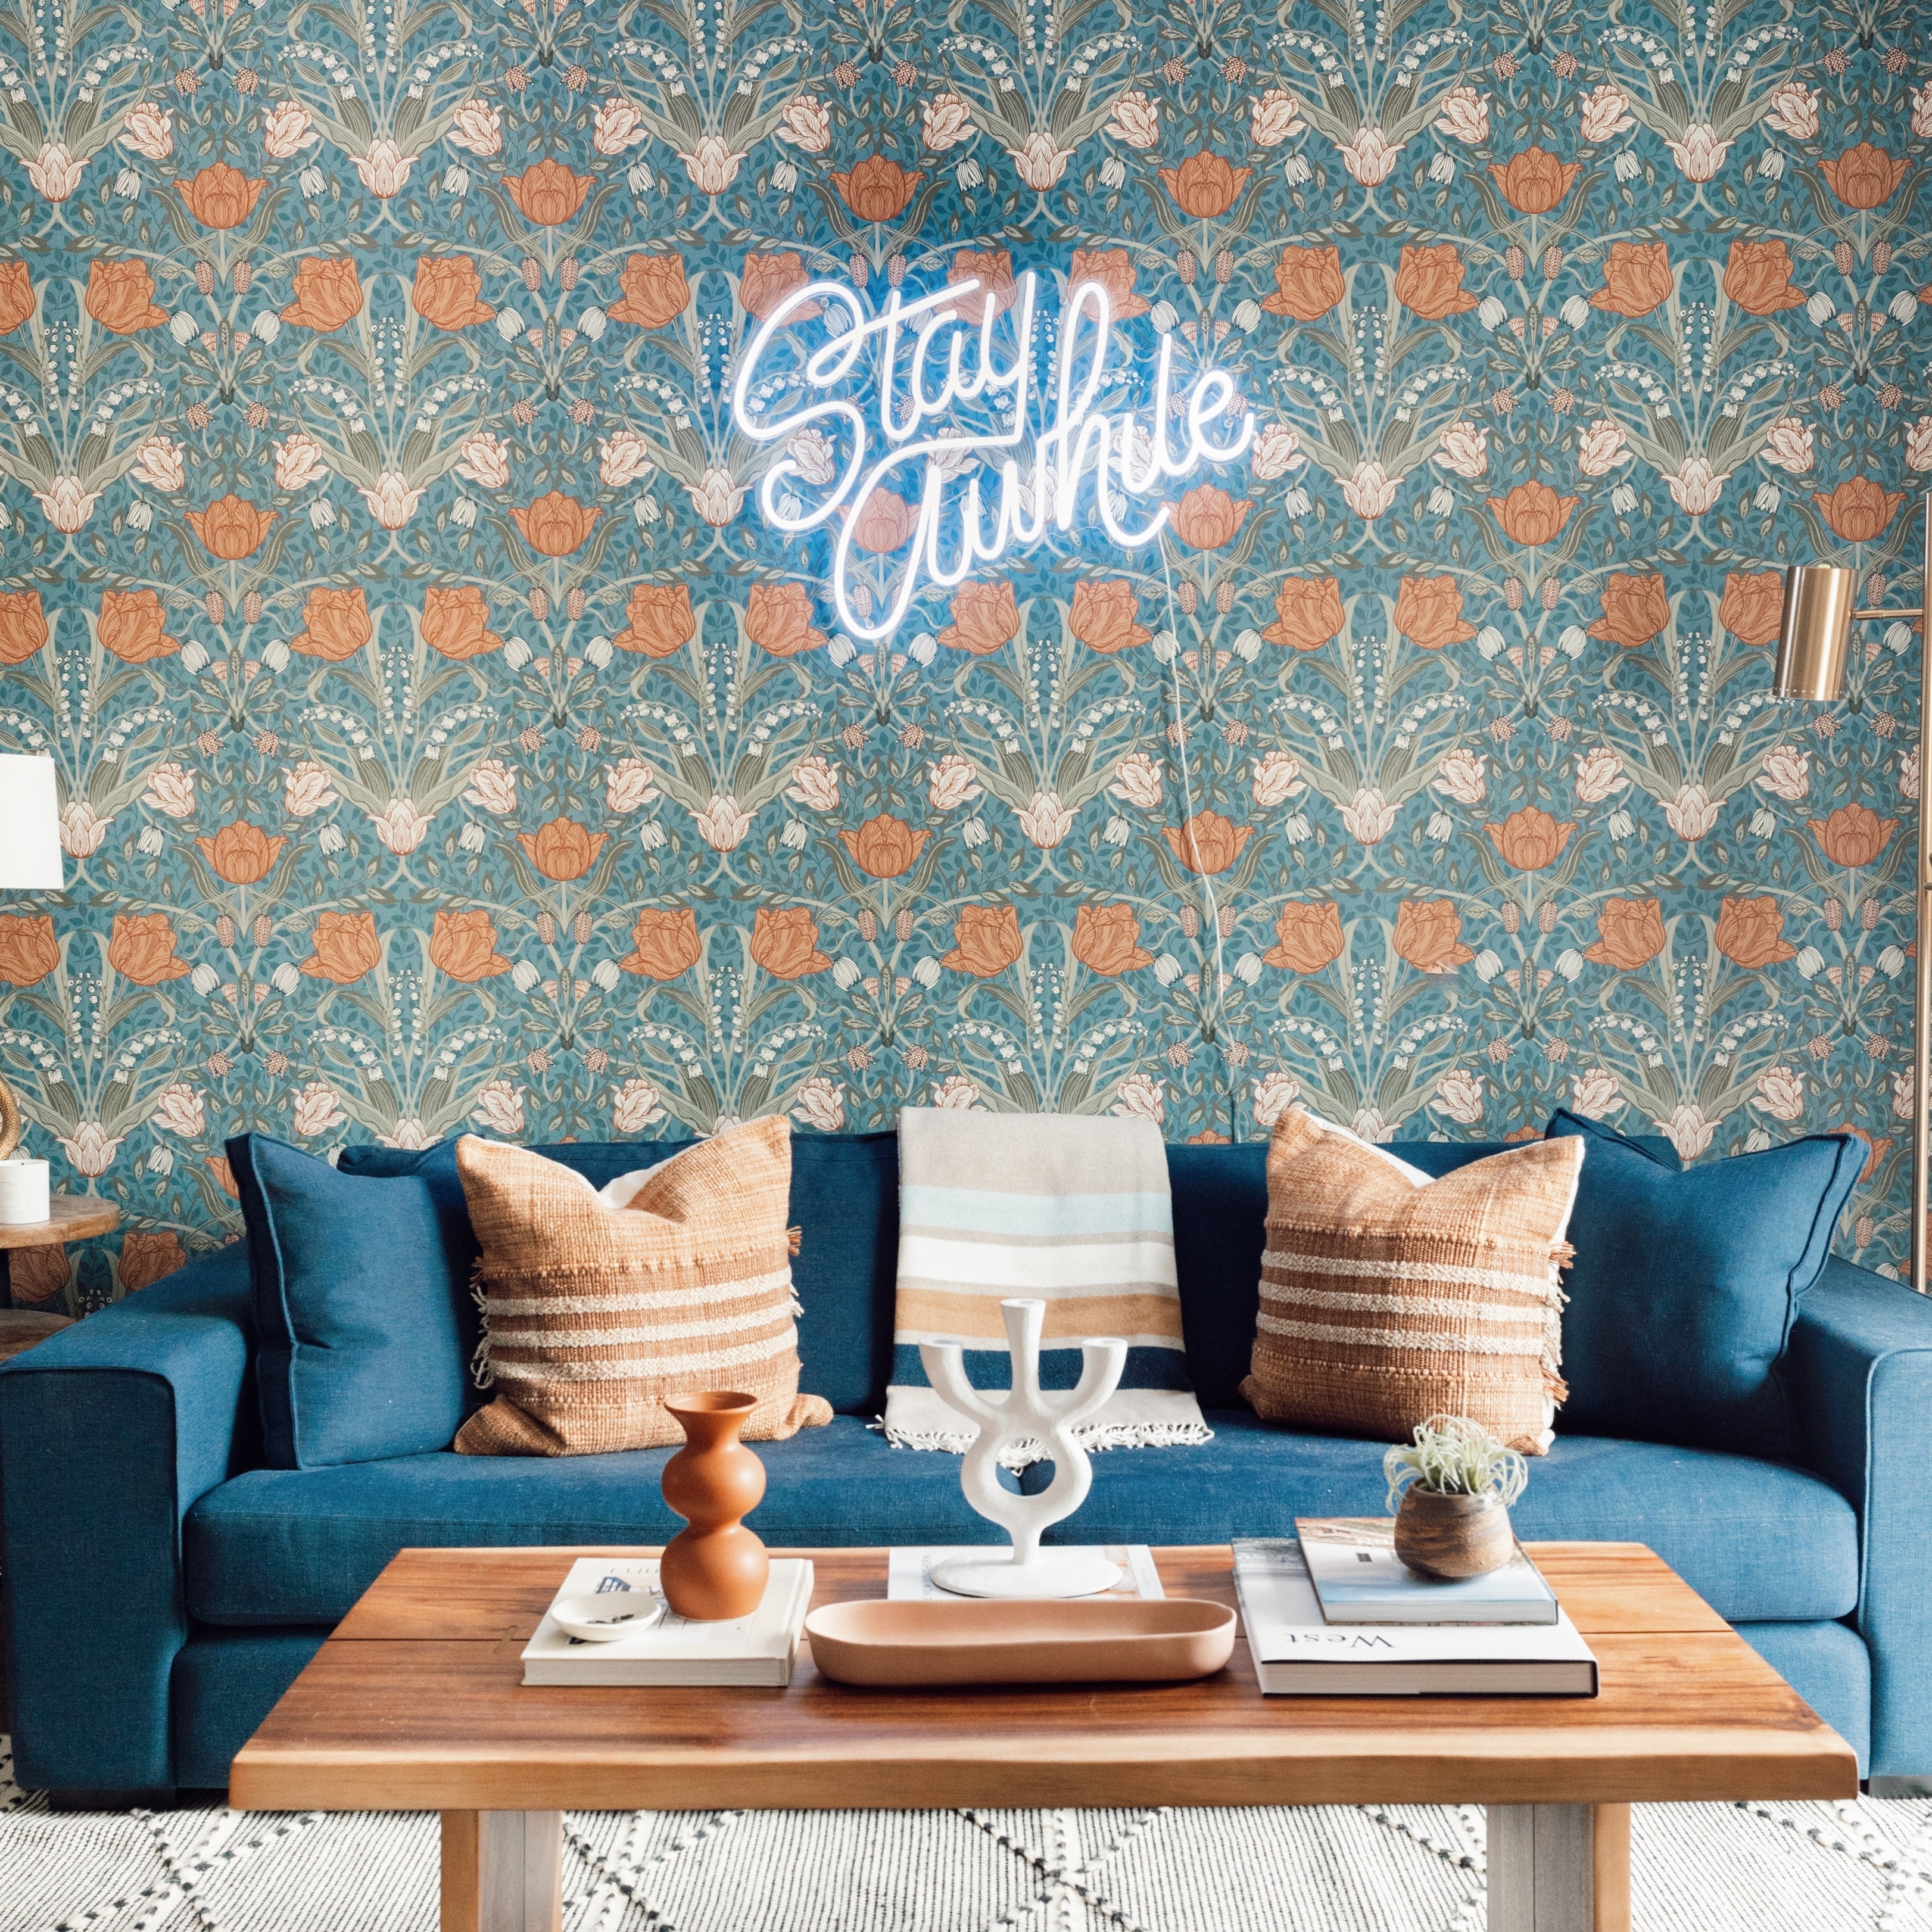 Stay Awhile by Caren Kreger - Neon Tabela - Neonbir